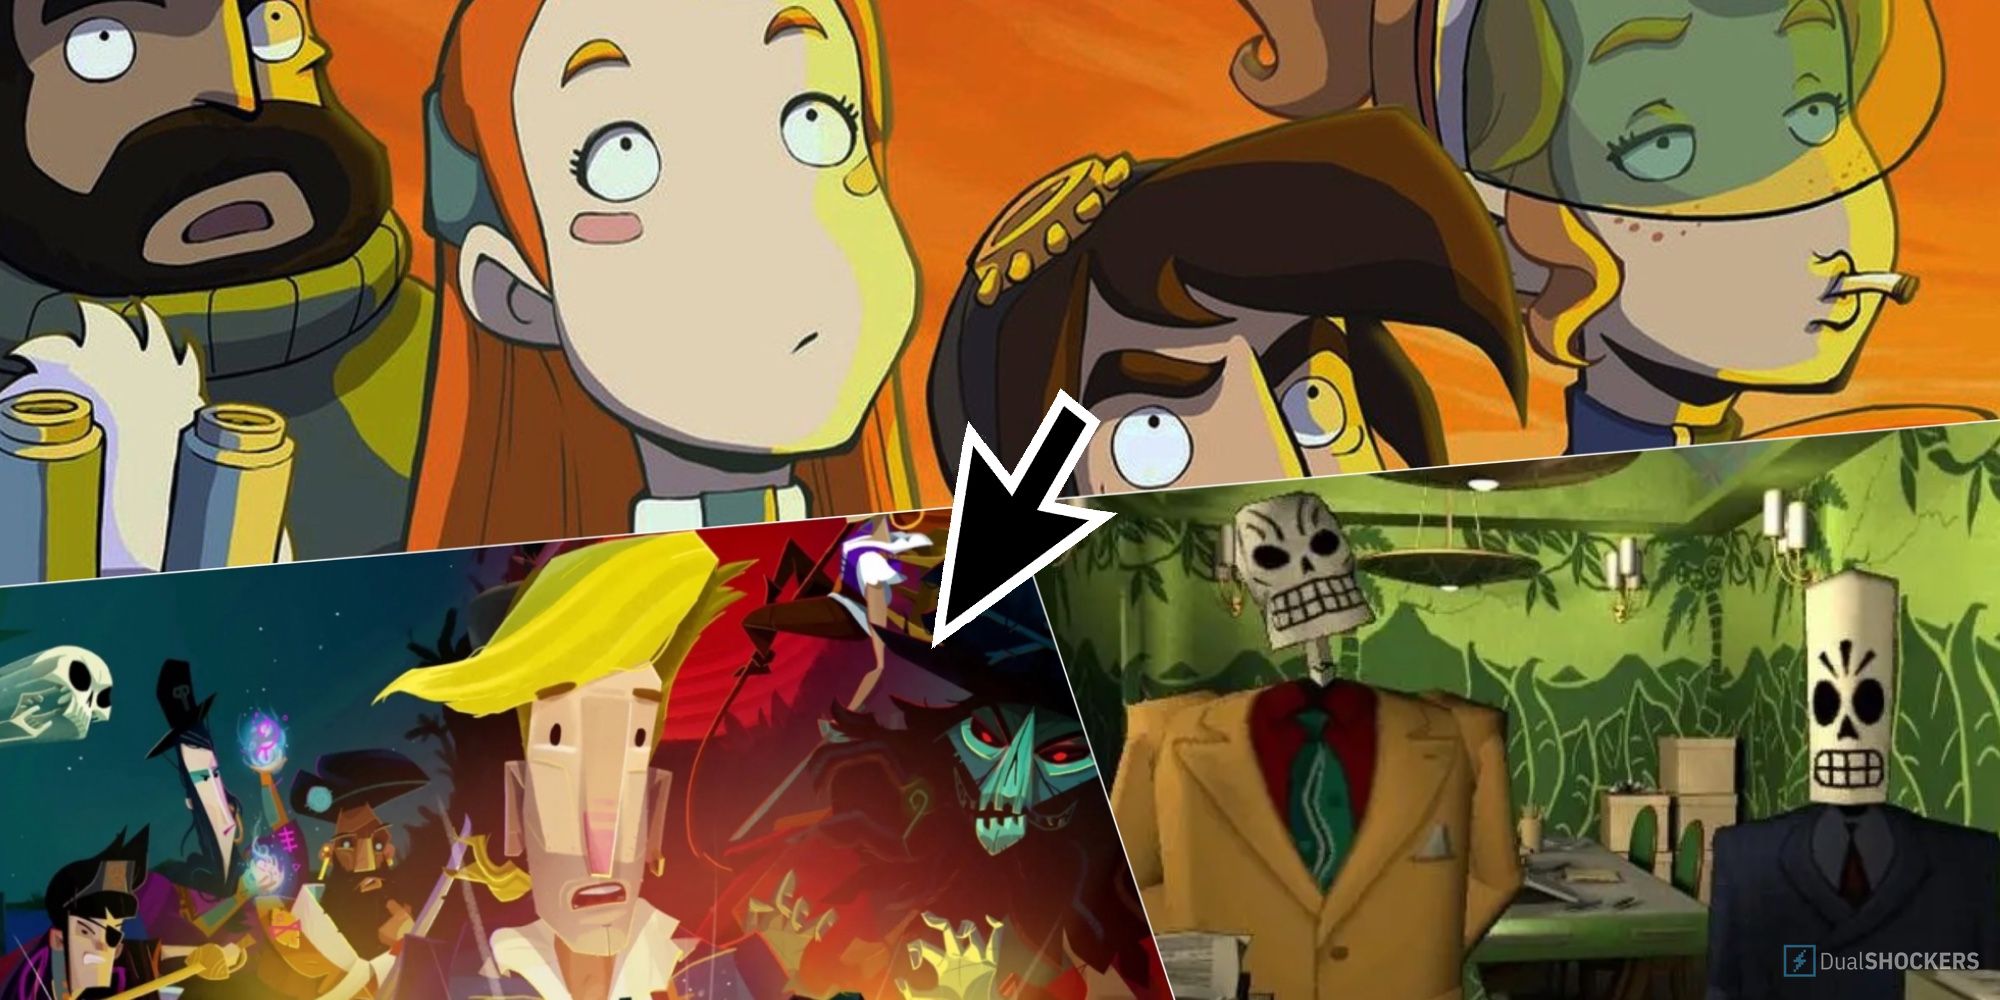 Best Point-And-Click Games, Deponia, Monkey Island, Grim Fandango